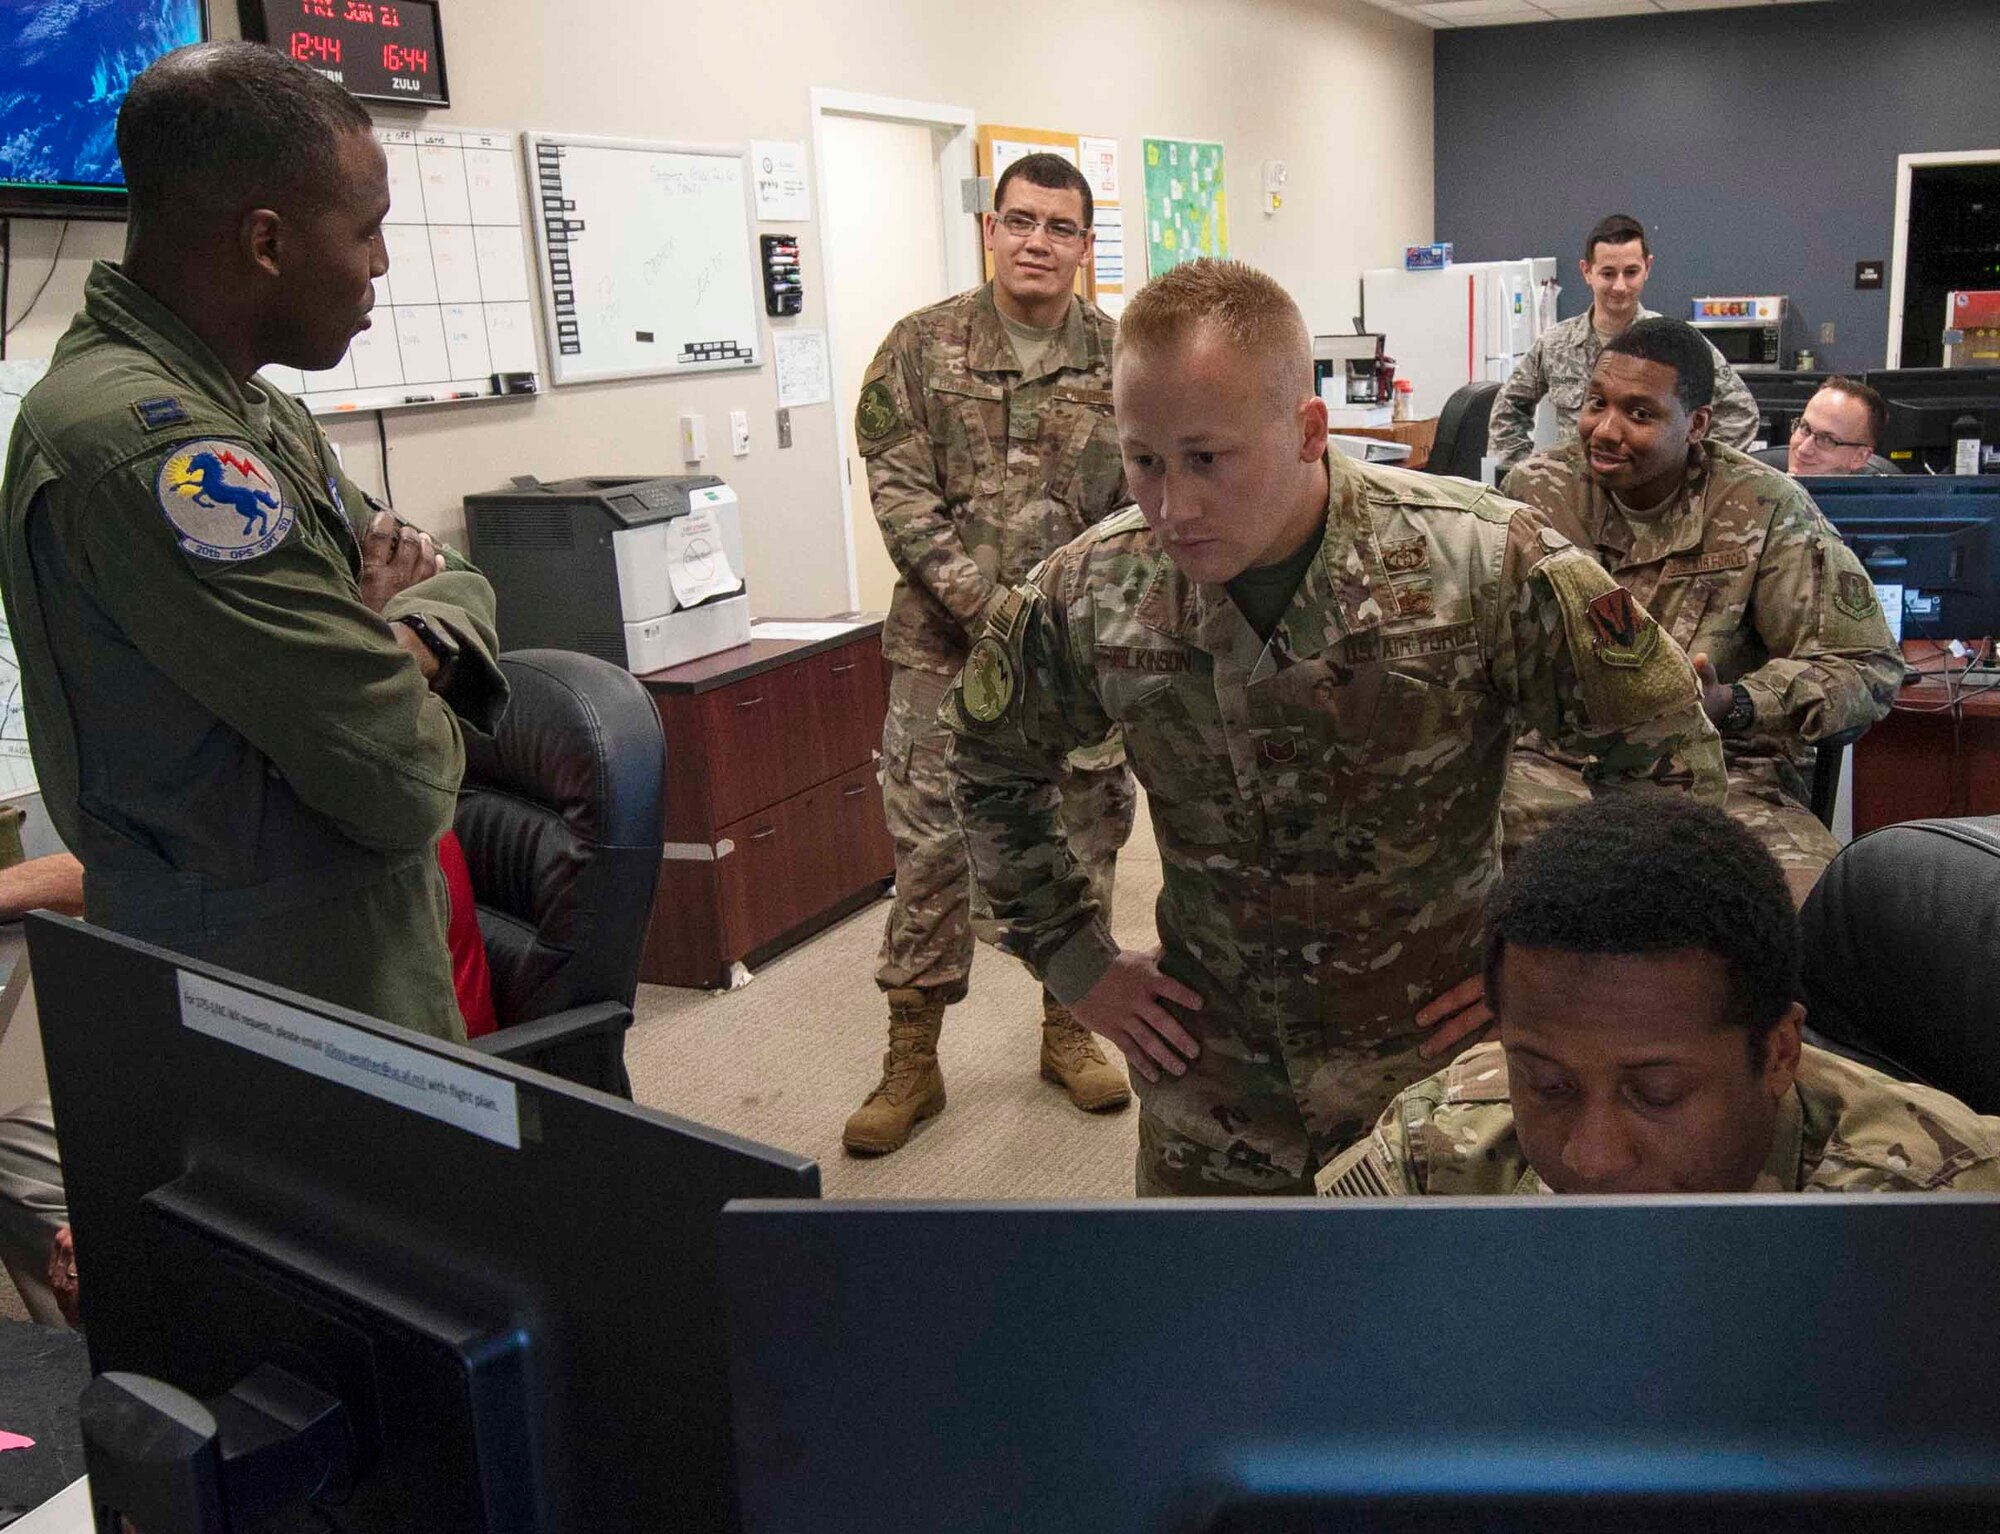 U.S. Airmen assigned to the 20th Operations Support Squadron weather flight office work together to monitor local weather at Shaw Air Force Base, South Carolina, June 21, 2019.